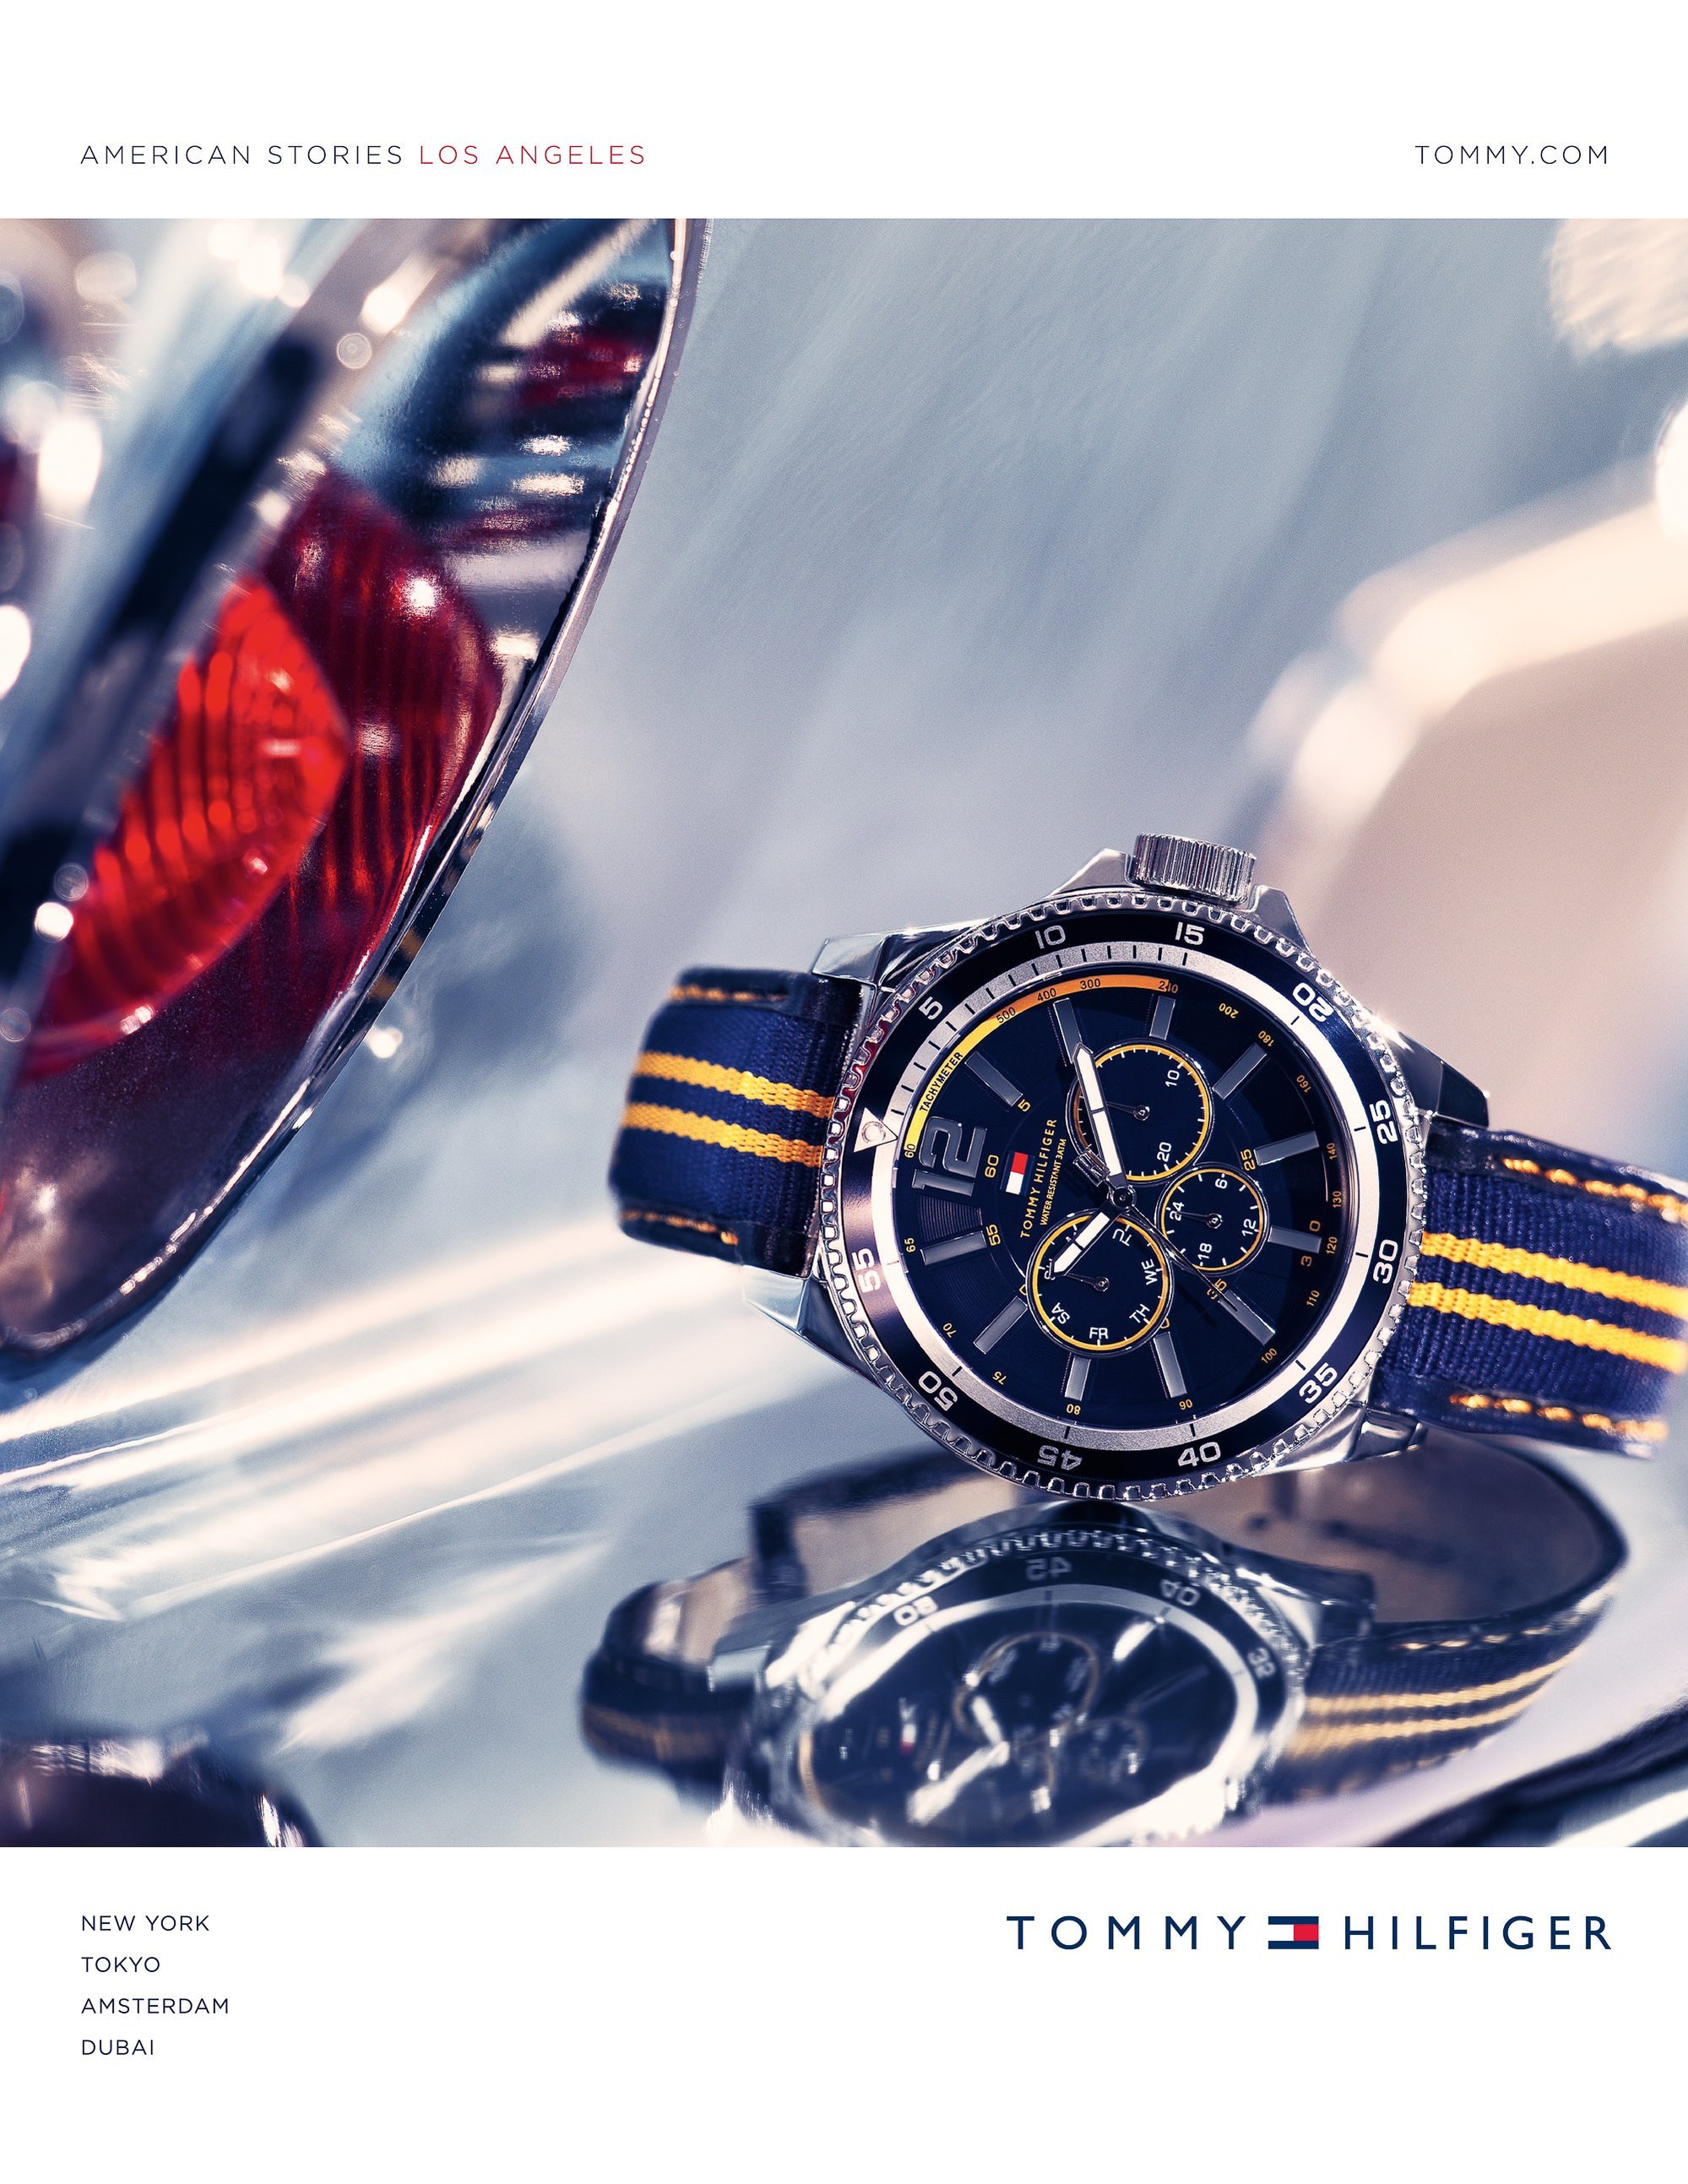 Tommy Hilfiger timepiece and watch campaign photography  by commercial, product & advertising photographer Timothy Hogan in studio Los Angeles